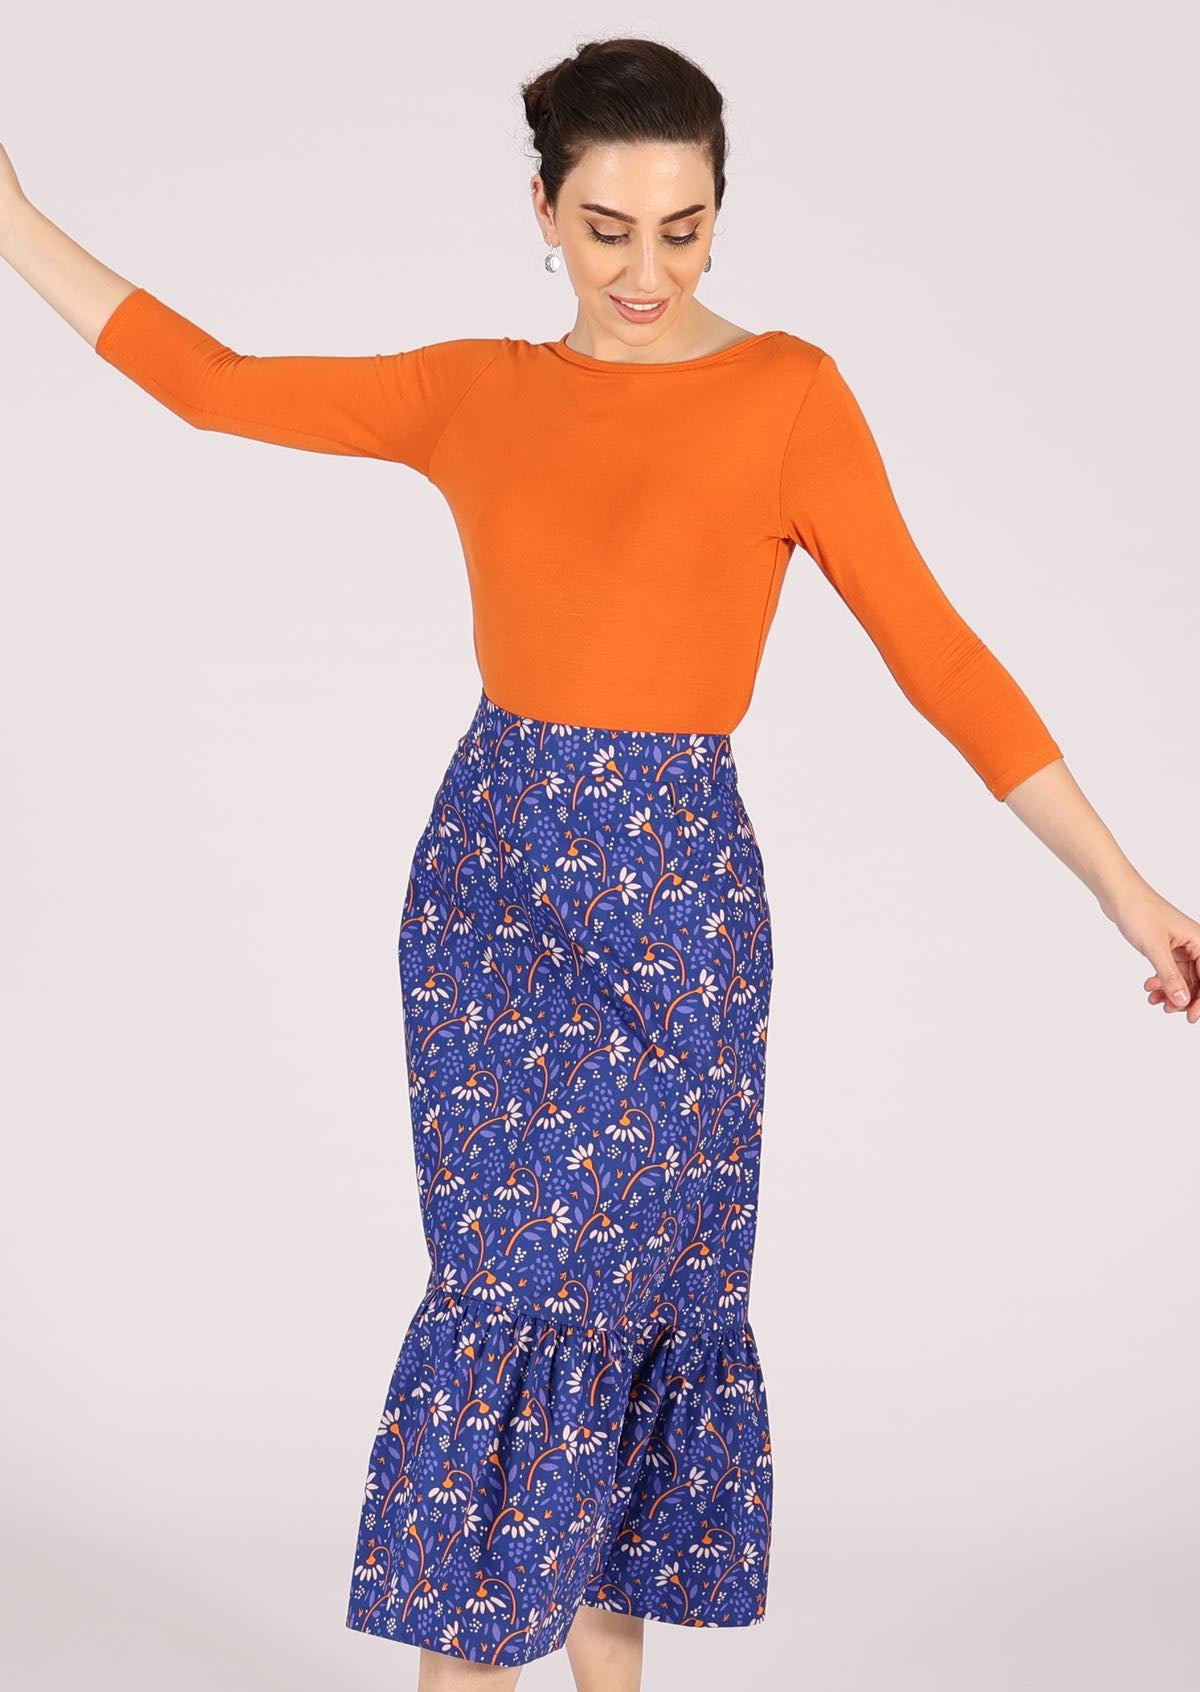 Retro cotton skirt with daisy print on blue base